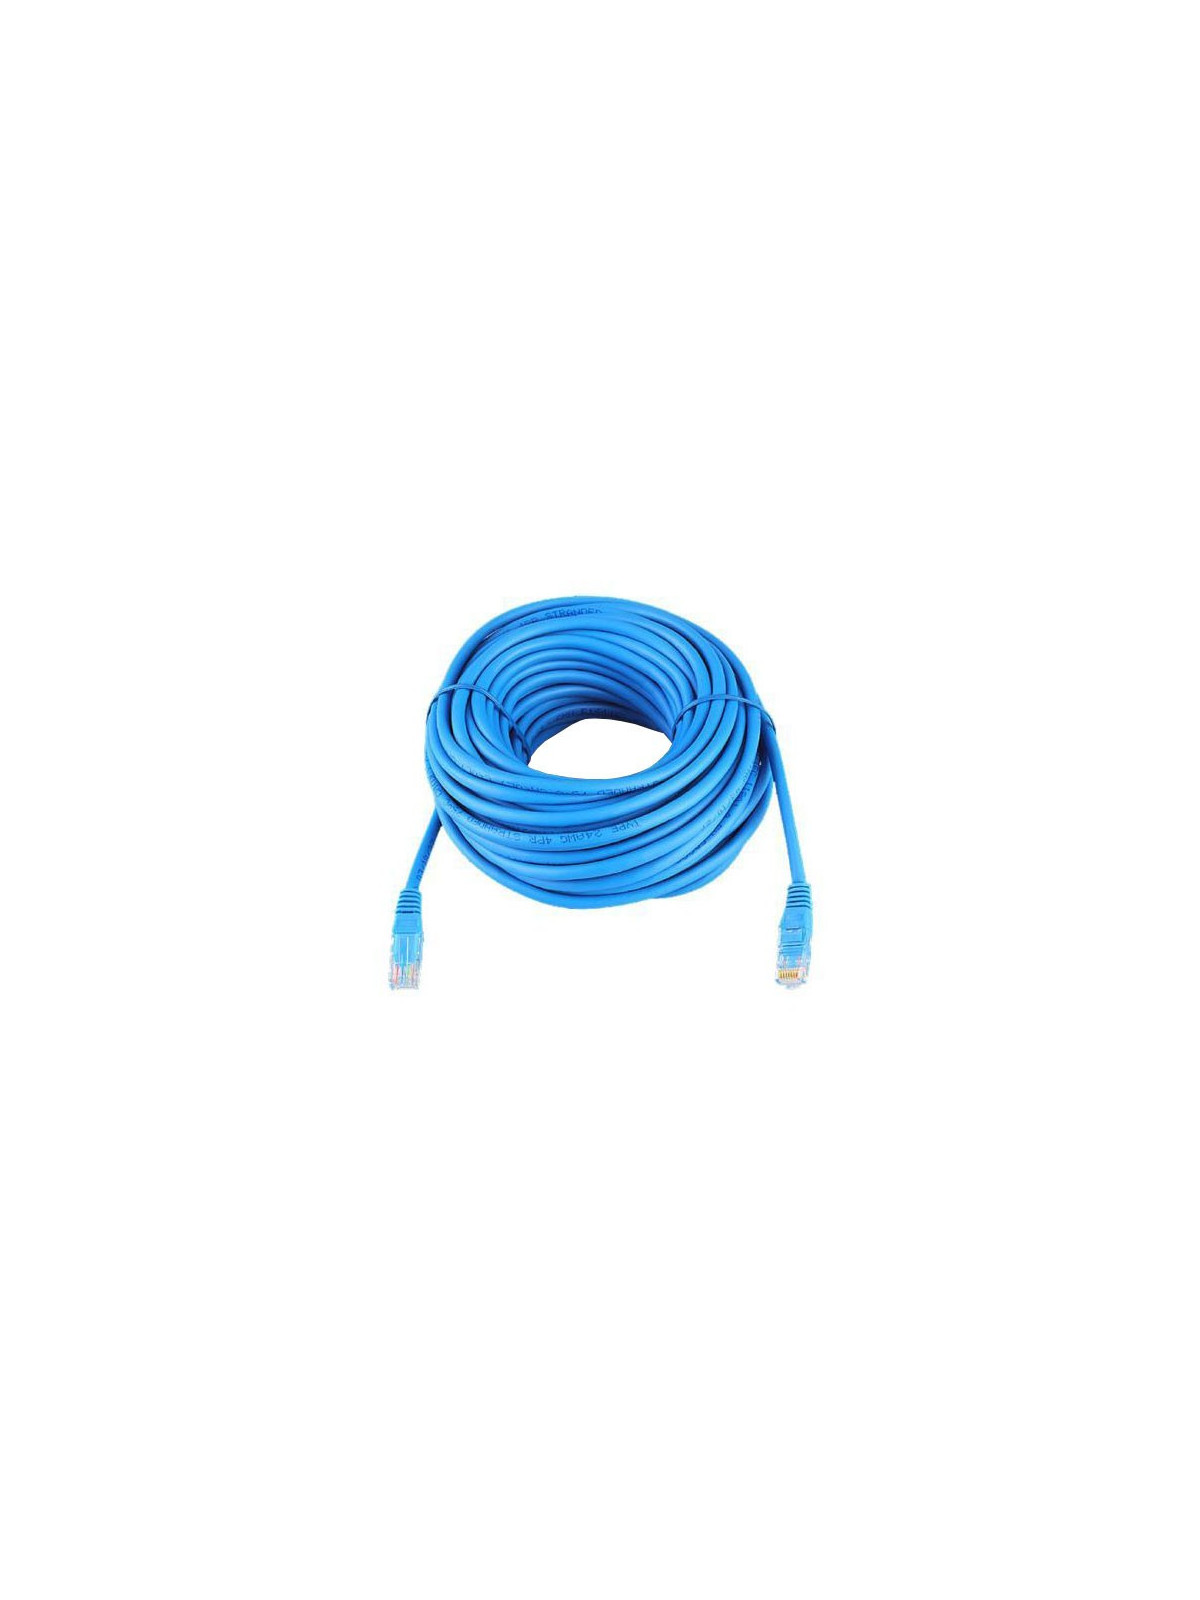 Cable UTP RJ45 - Victron